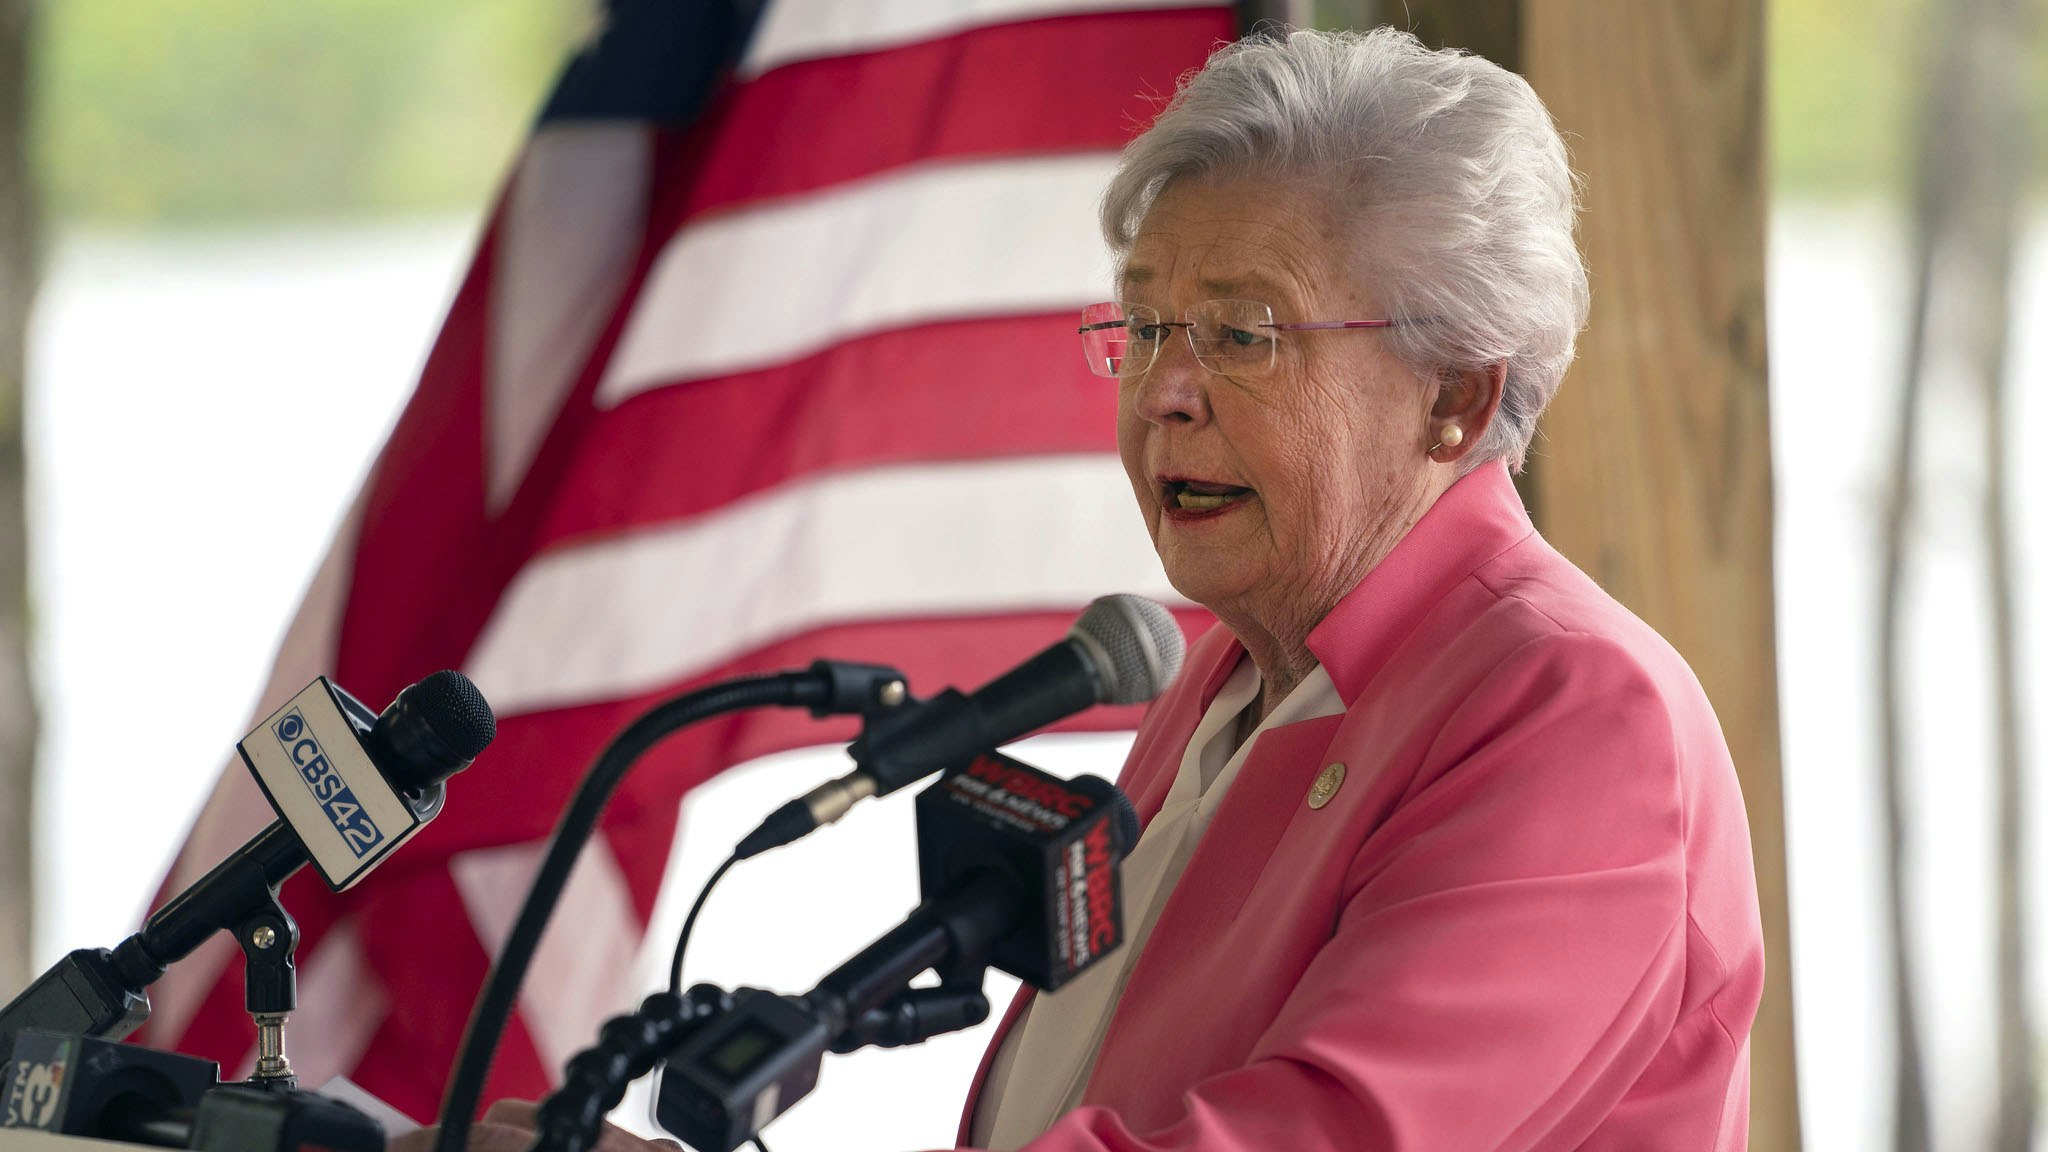 Governor Kay Ivey spoke at the Alabama State Parks Foundation Capital Campaign Kick-off Thursday April 14, 2021 at Oak Mountain State Park in Pelham, Ala.